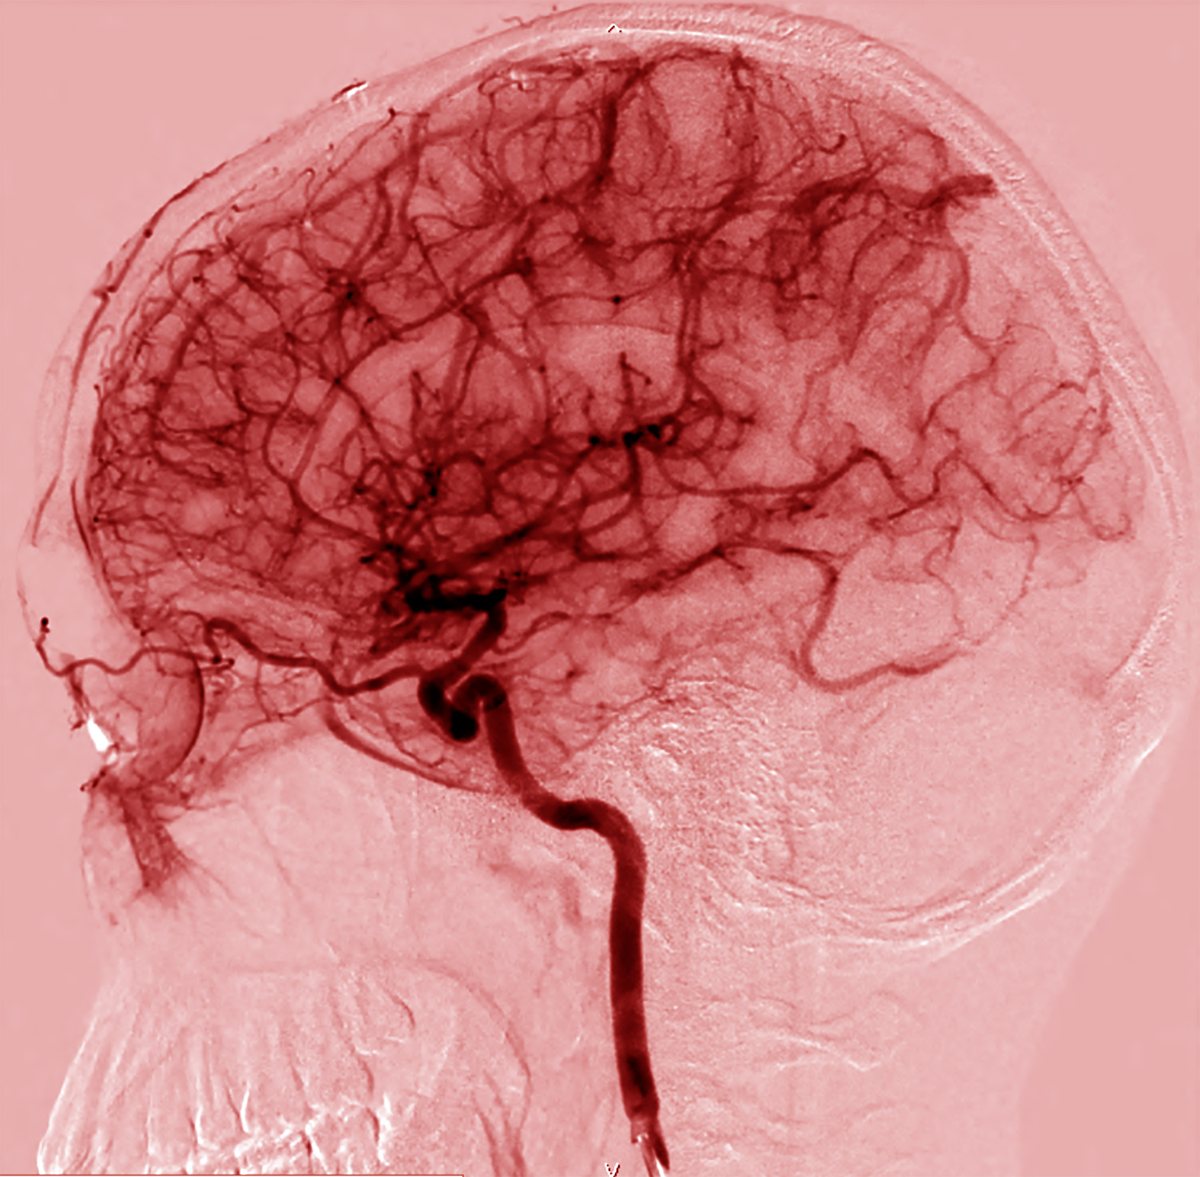 This is an image of the brain’s many blood vessels. The cells that line these vessels create the blood-brain barrier.   